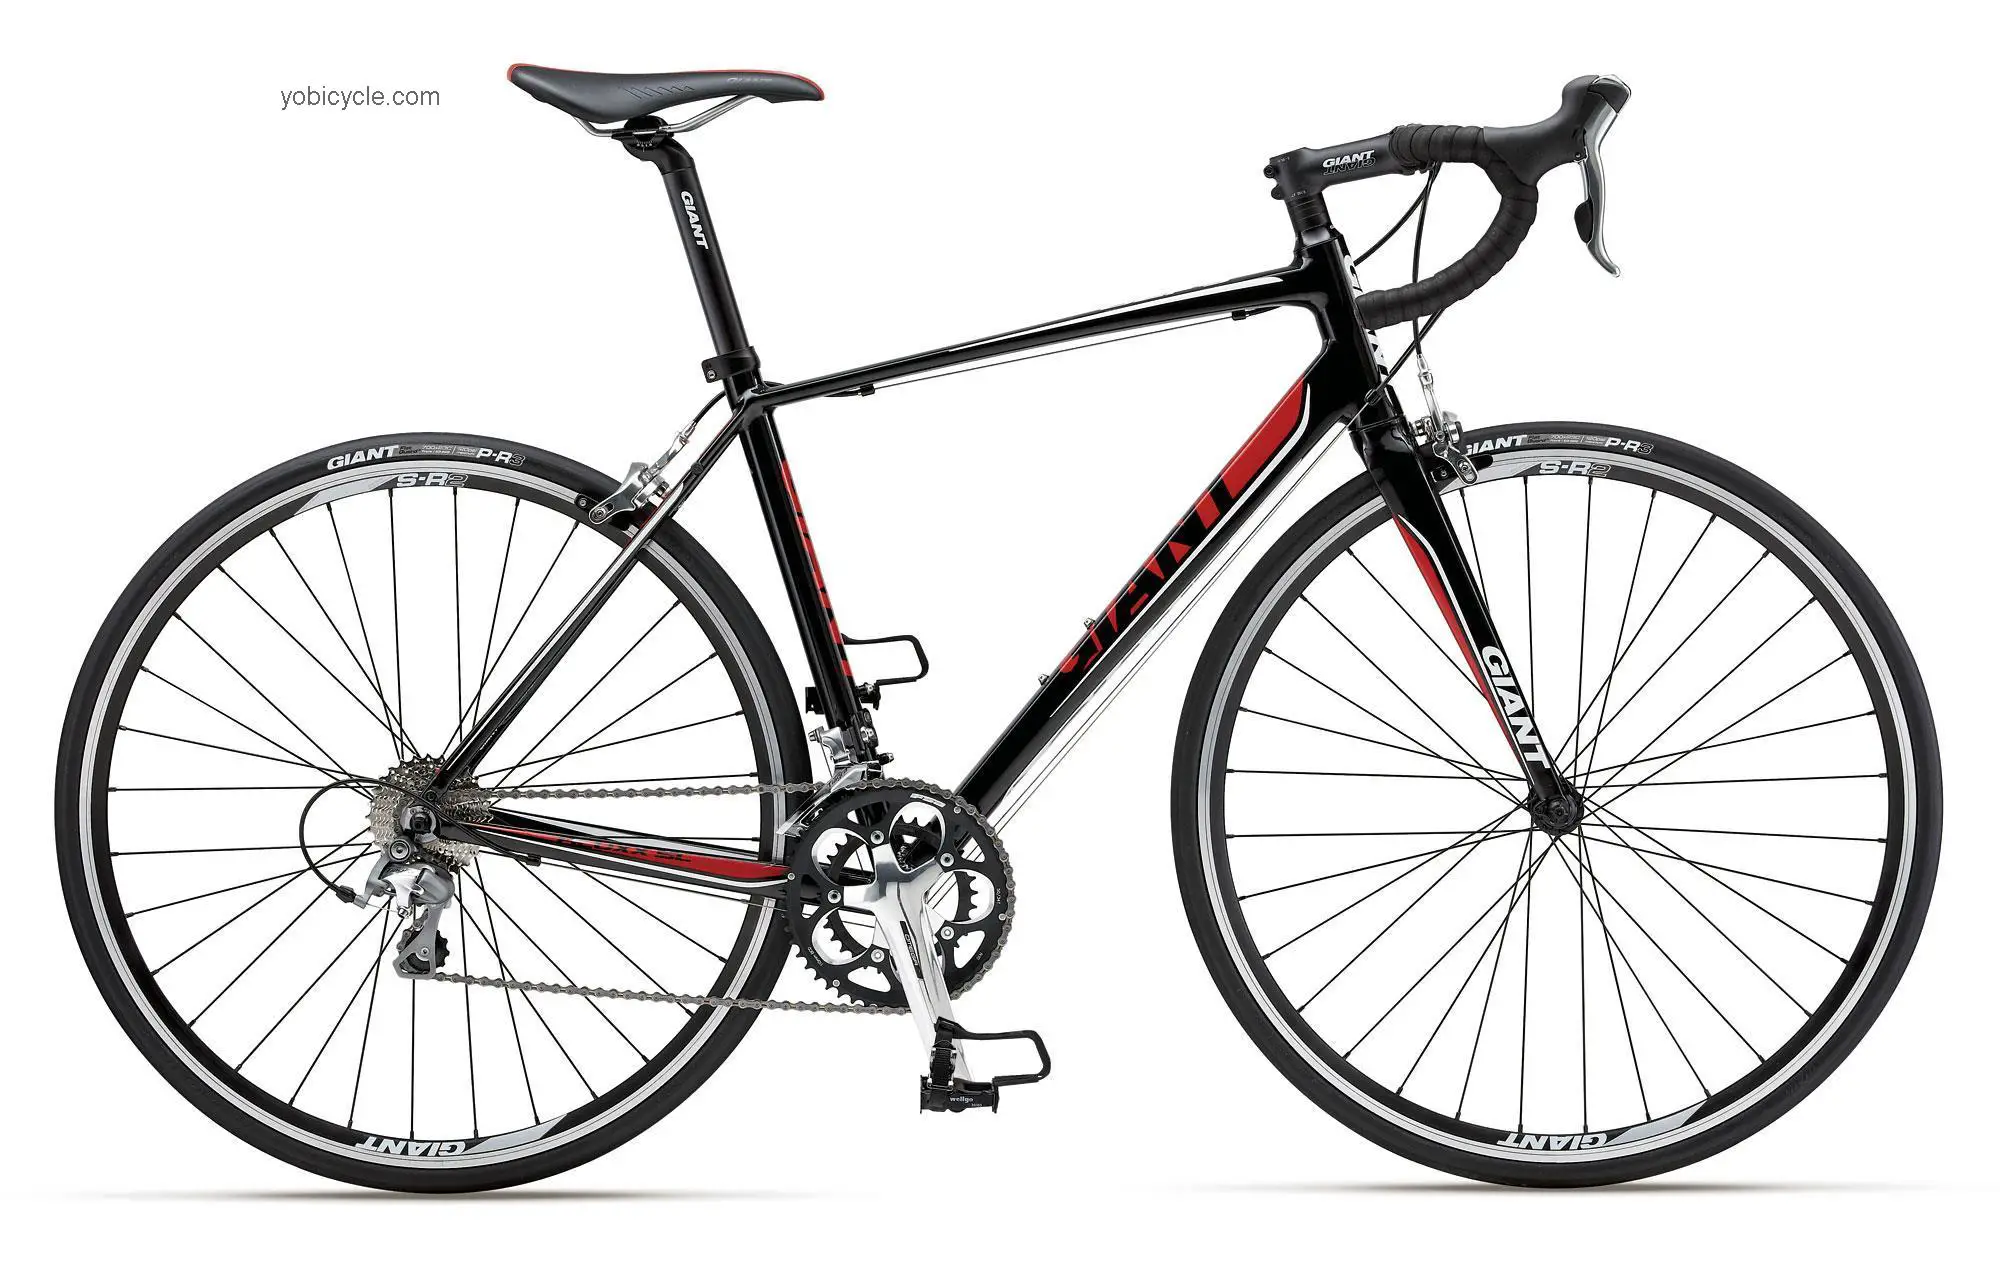 Giant Defy 2 Compact 2012 comparison online with competitors